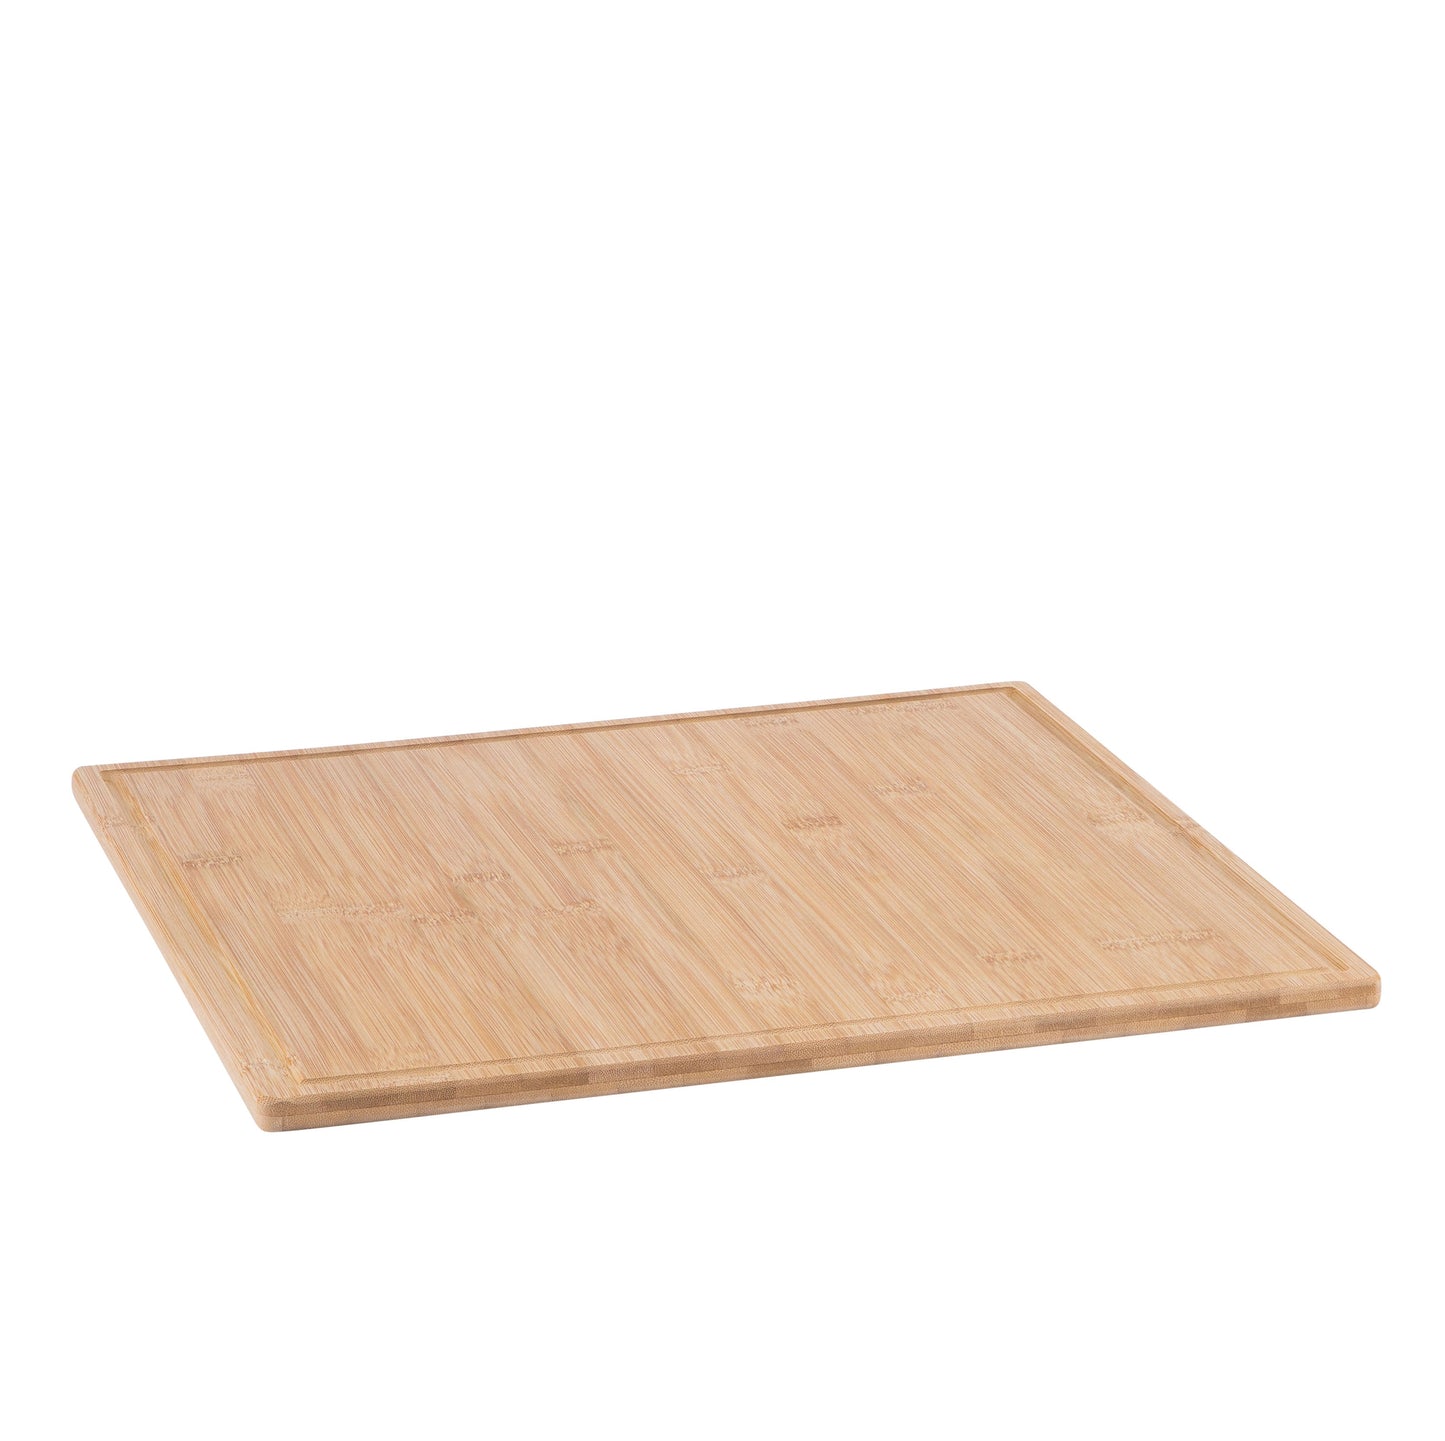 bamboo cutting board tray 16x16x0.5 inches  45.72 x 45.72 x 1.27 cm  eco friendly by hammont